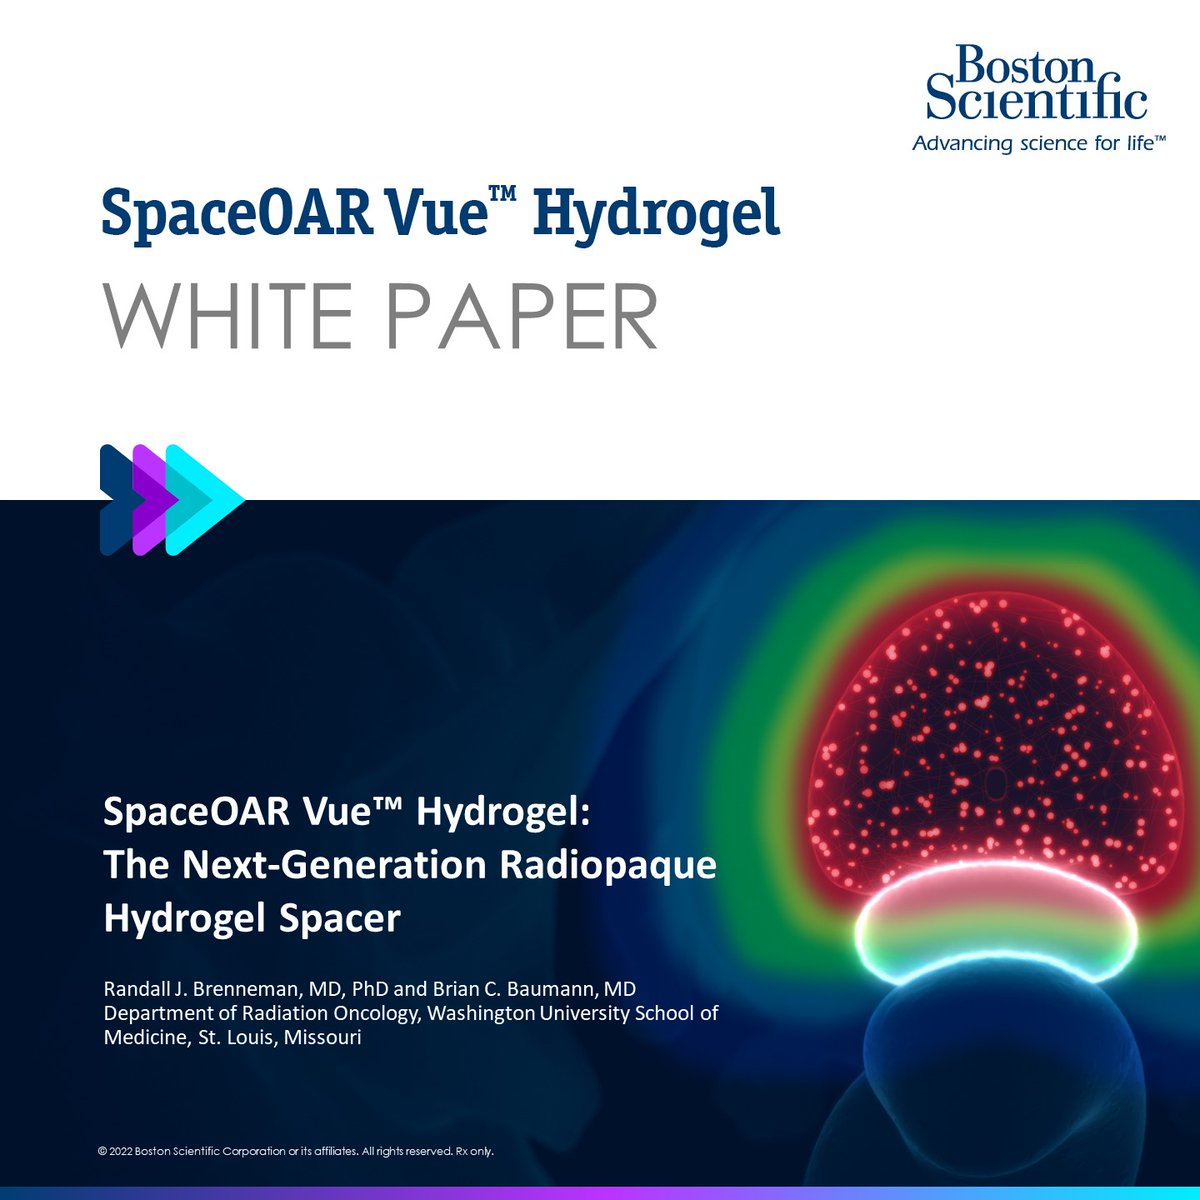 MRI isn't always an option for #prostatecancer patients. SpaceOAR Vue Hydrogel is designed for enhanced visibility on CT to expand hydrogel spacer use to patients who can't undergo MRI scans. Read insights from @BrianBaumannMD & @brennsstrahlung: bit.ly/3PDLQop